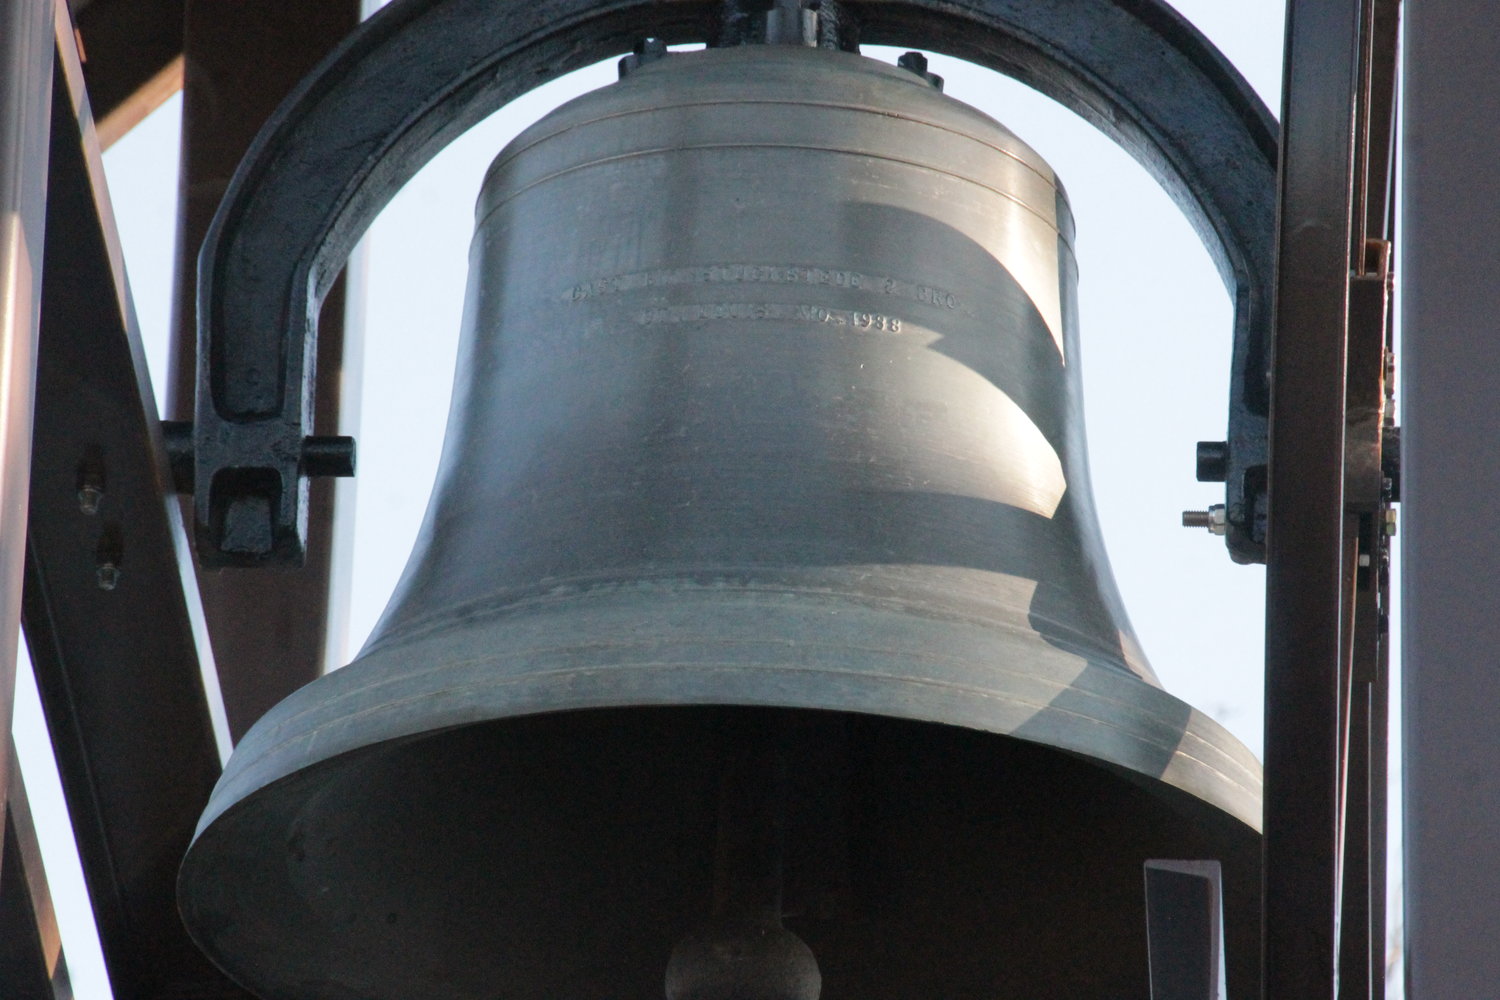 The bell in the new bell tower outside St. Jude Church in Richland was cast in St. Louis in 1938.